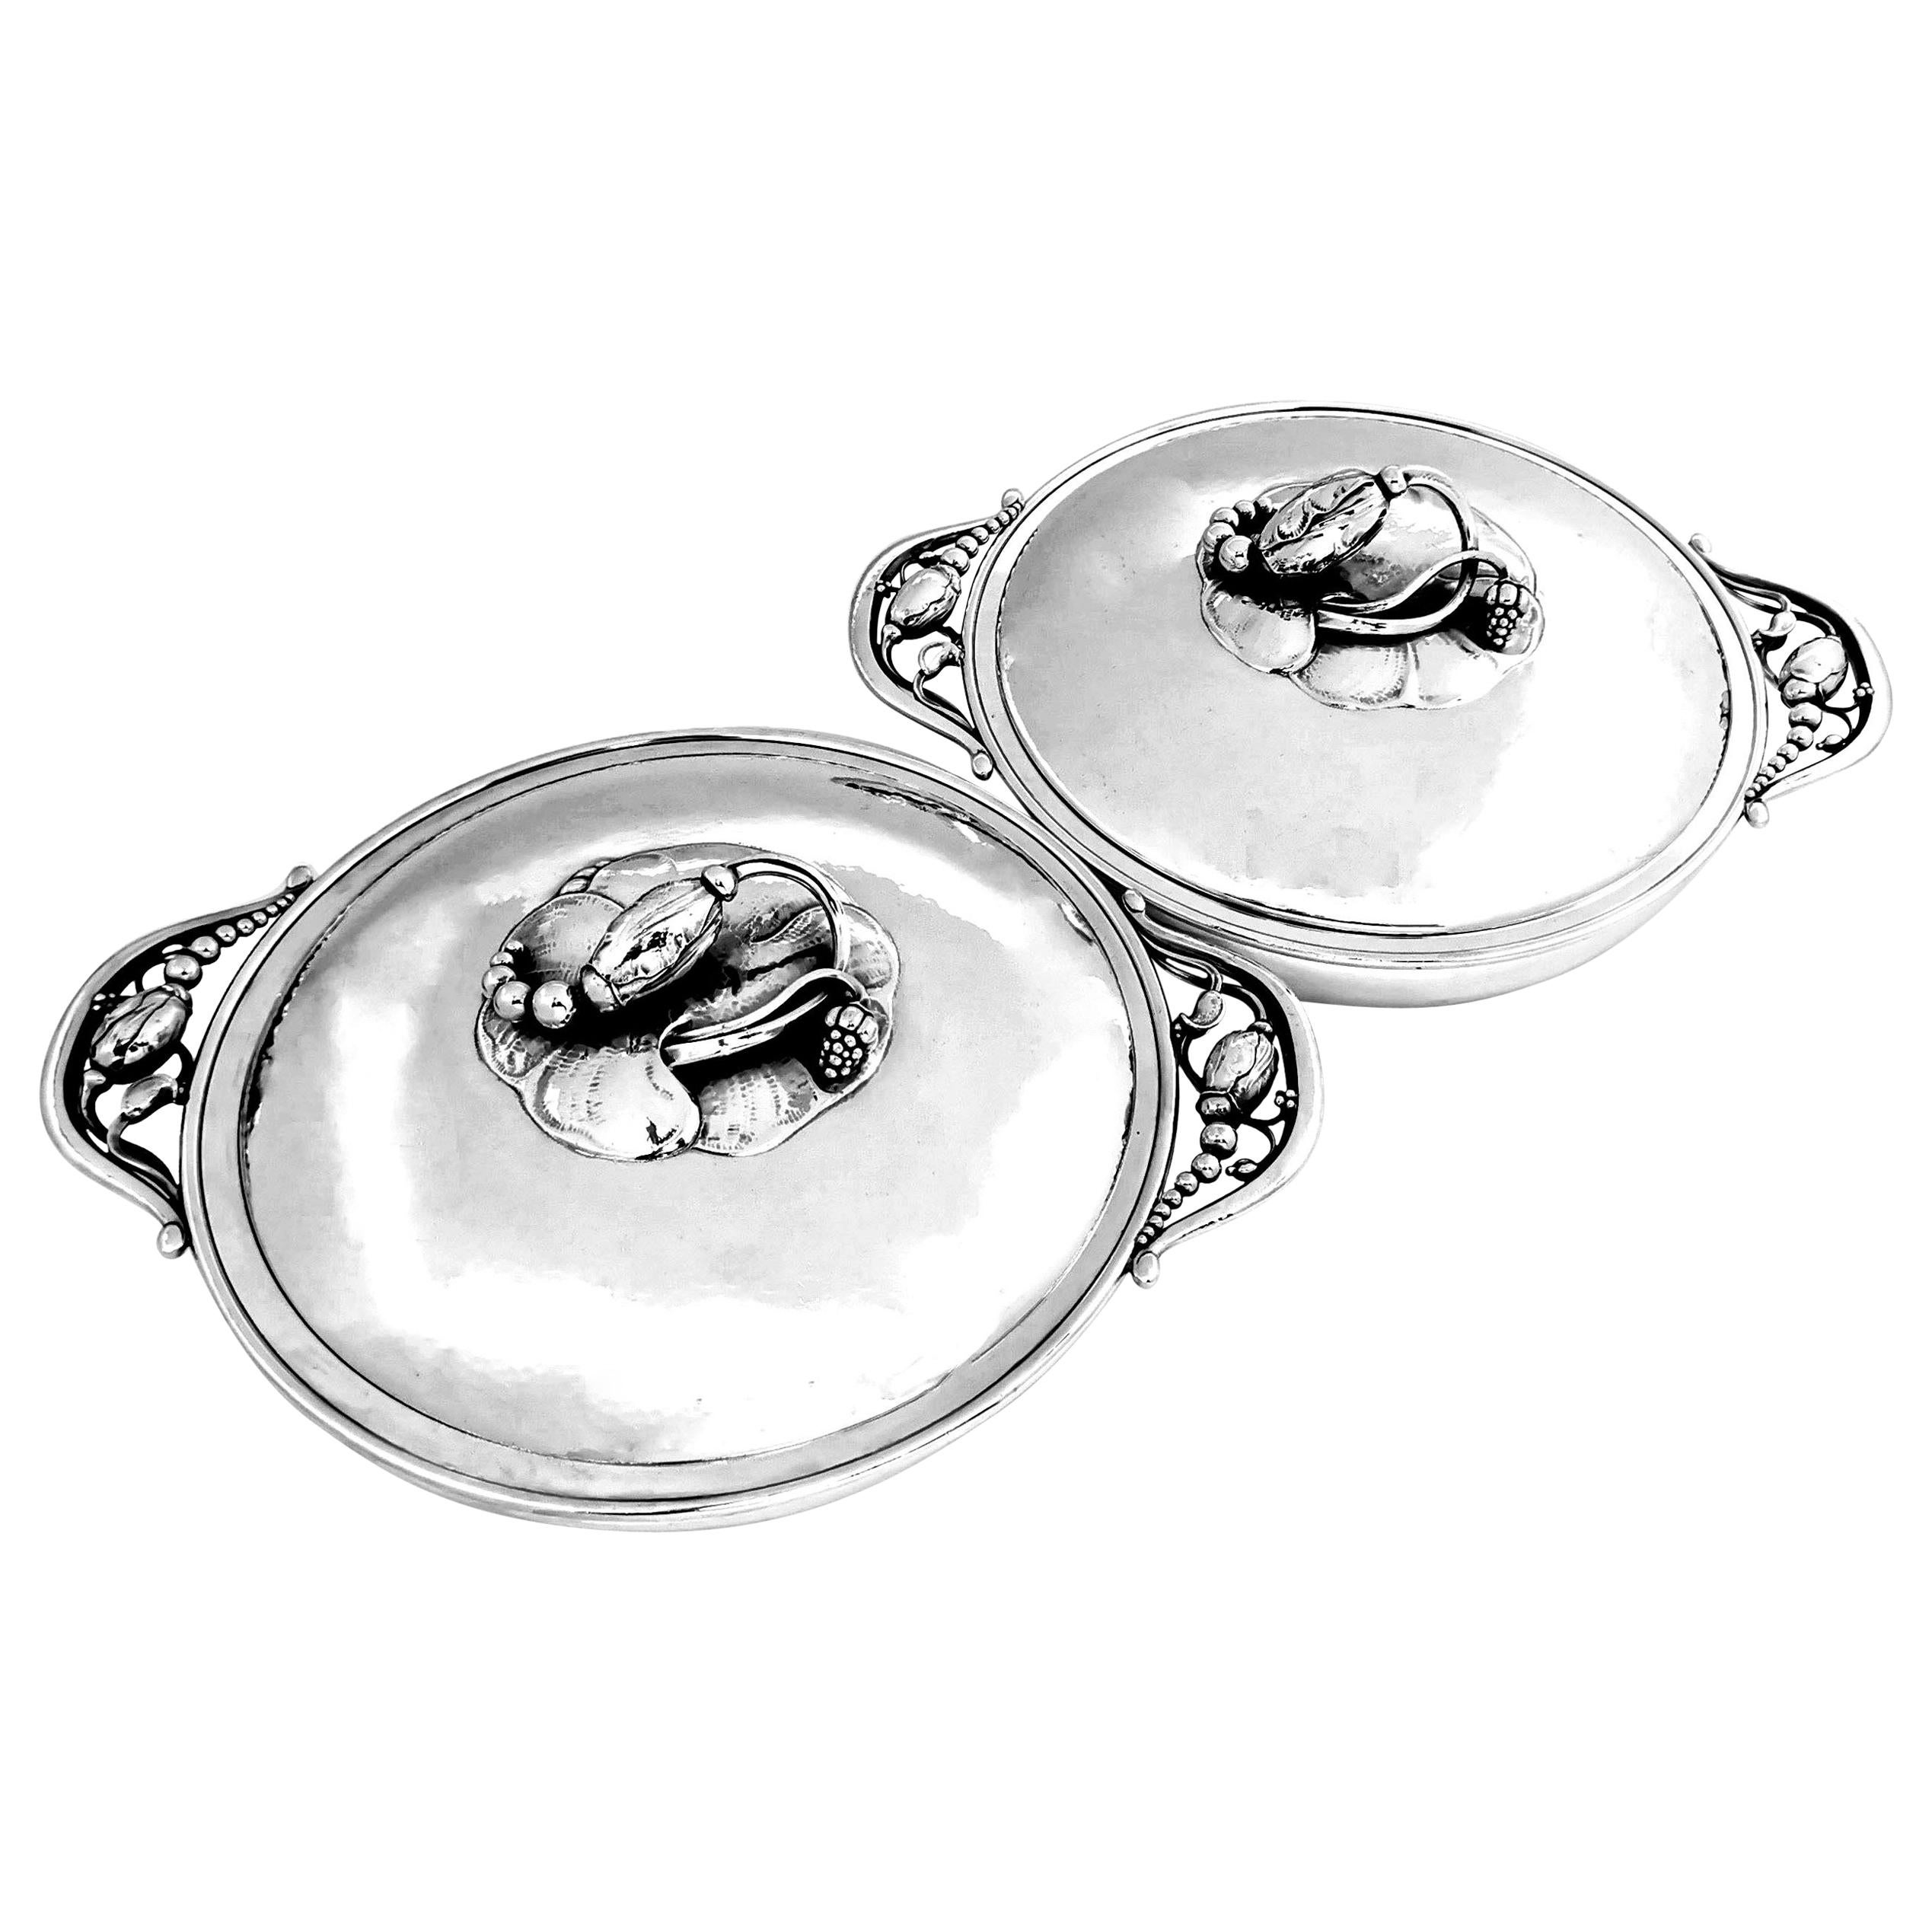 Pair of Georg Jensen Silver Blossom Vegetable Entree Dishes Tureens 2A c. 1905